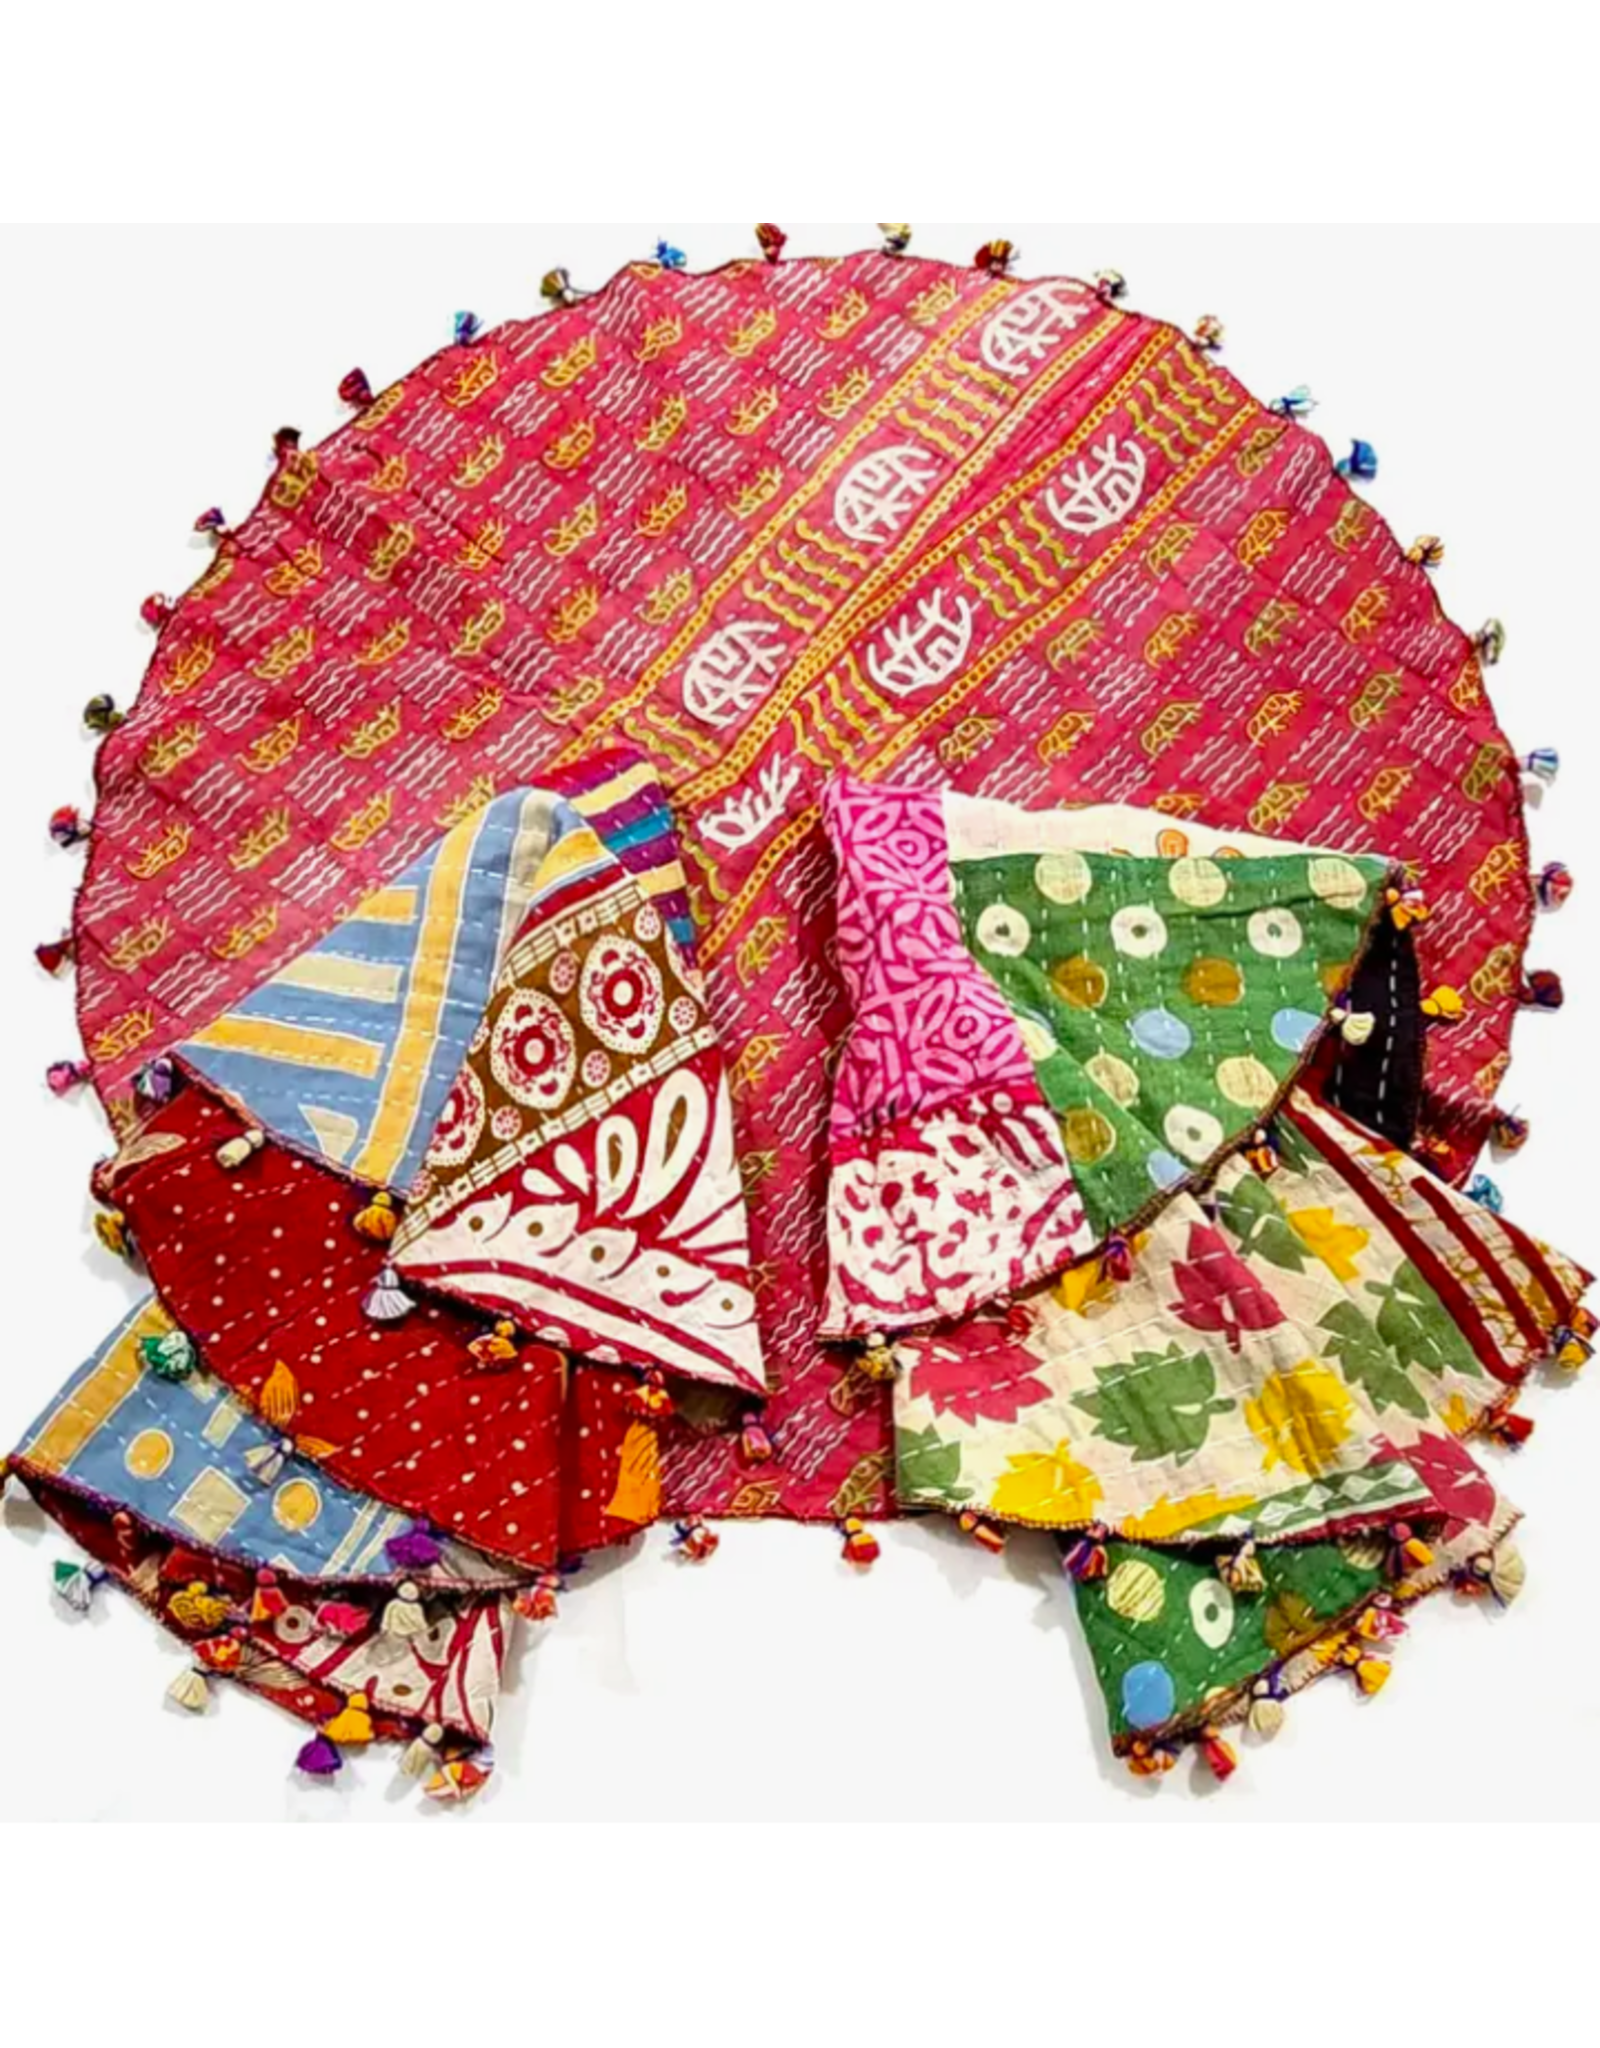 Trade roots Round Kantha Table Cover 25",  India